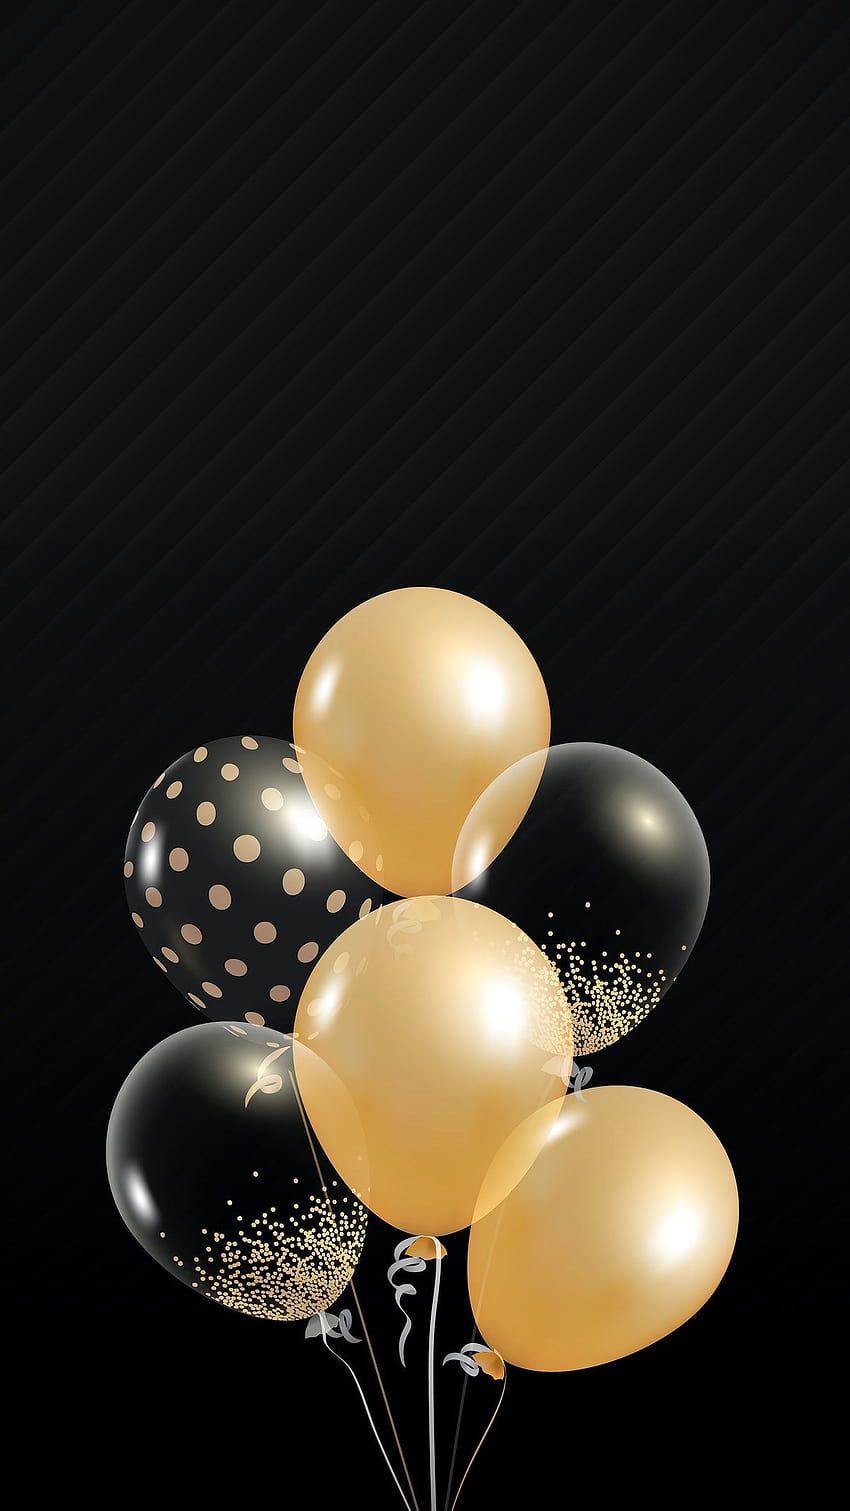 Black and gold balloons phone rawpixel, aesthetic balloons HD phone wallpaper